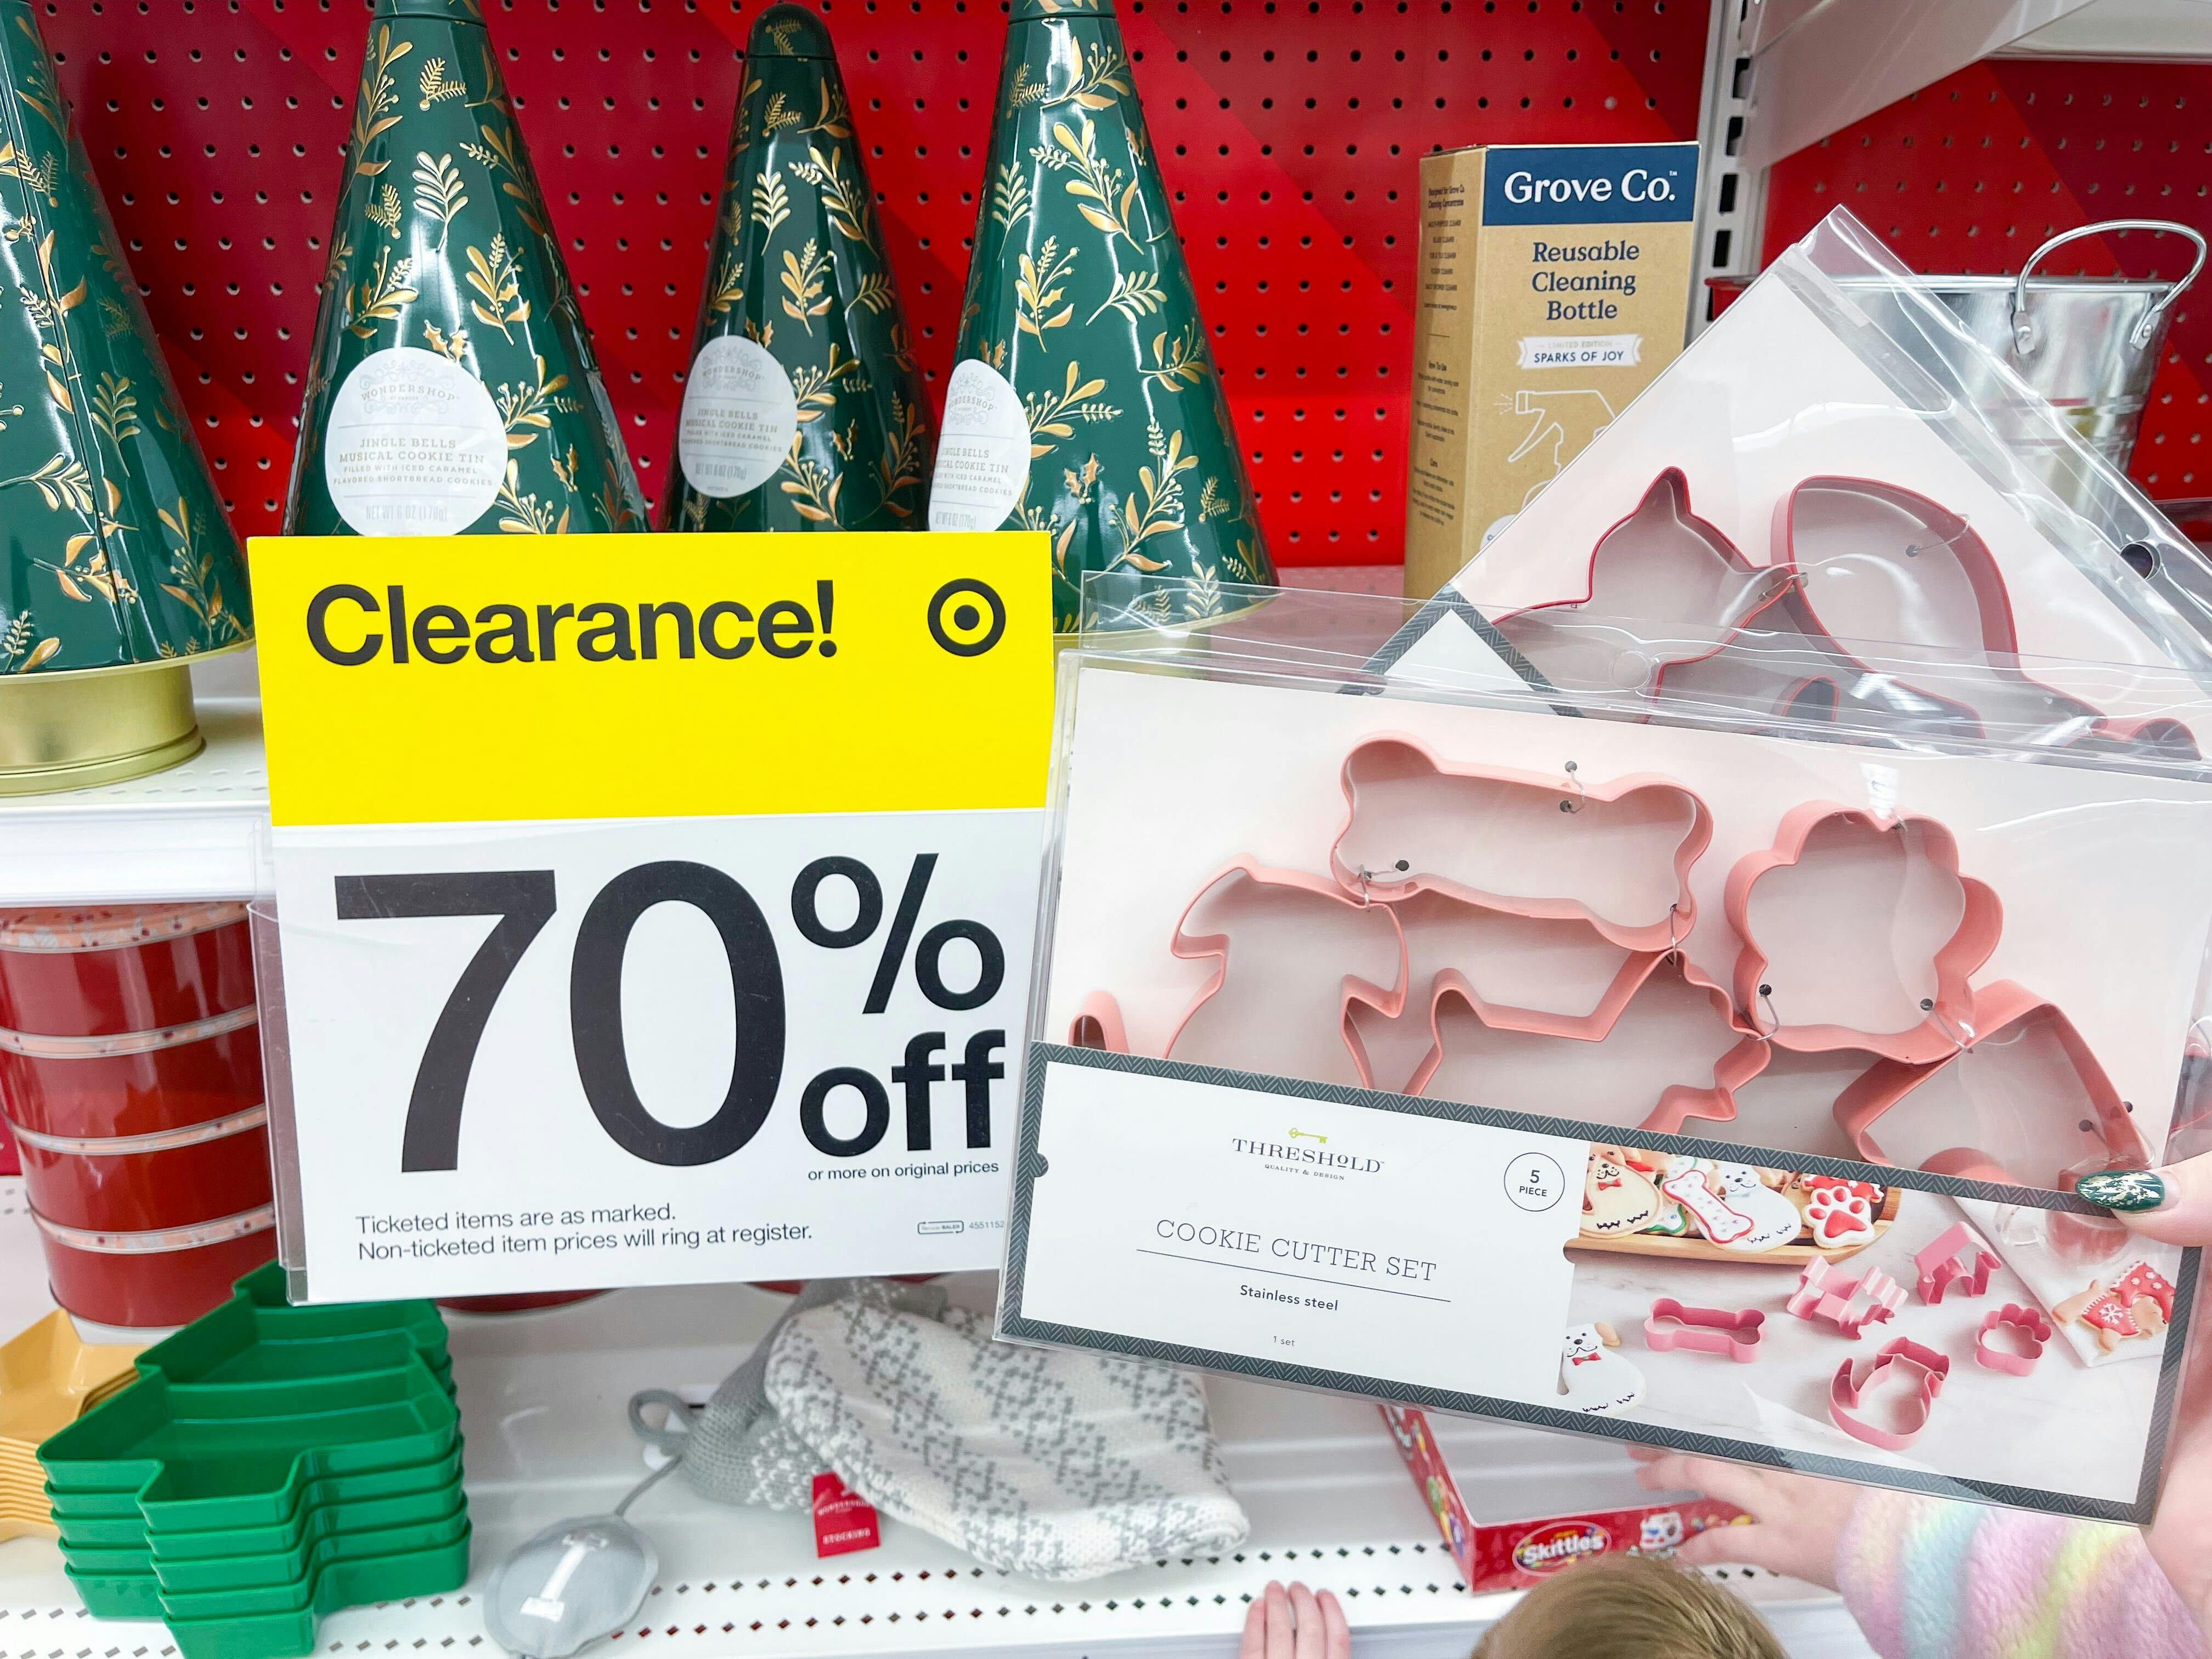 A box of Christmas cookie cutters being held up next to a Target clearance sign for 70% off on a shelf with more Christmas decor.